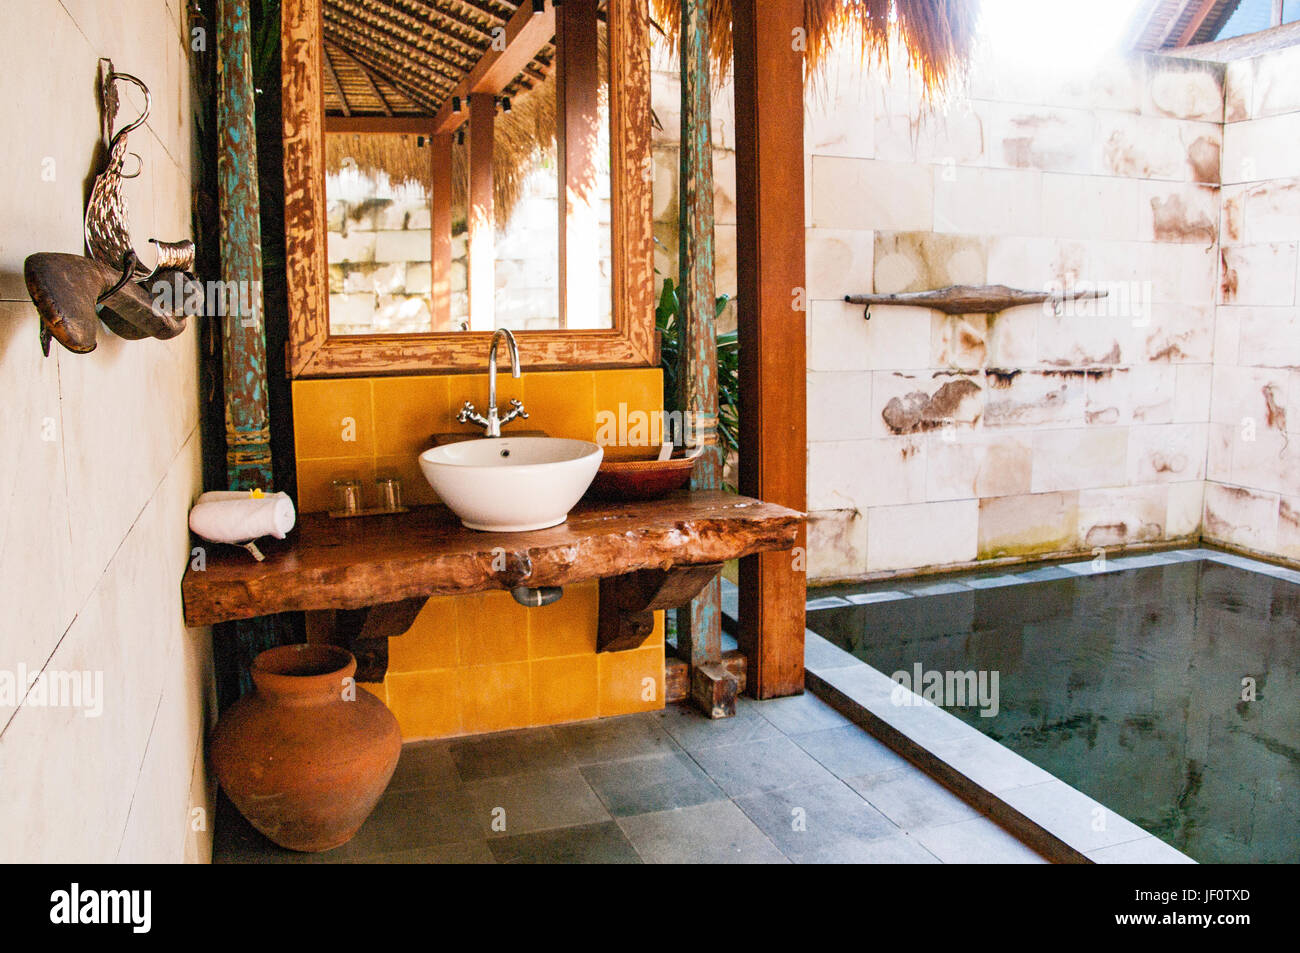 Bali Interior of luxury tropical bathroom with private swimming pool  Indonesia Stock Photo - Alamy